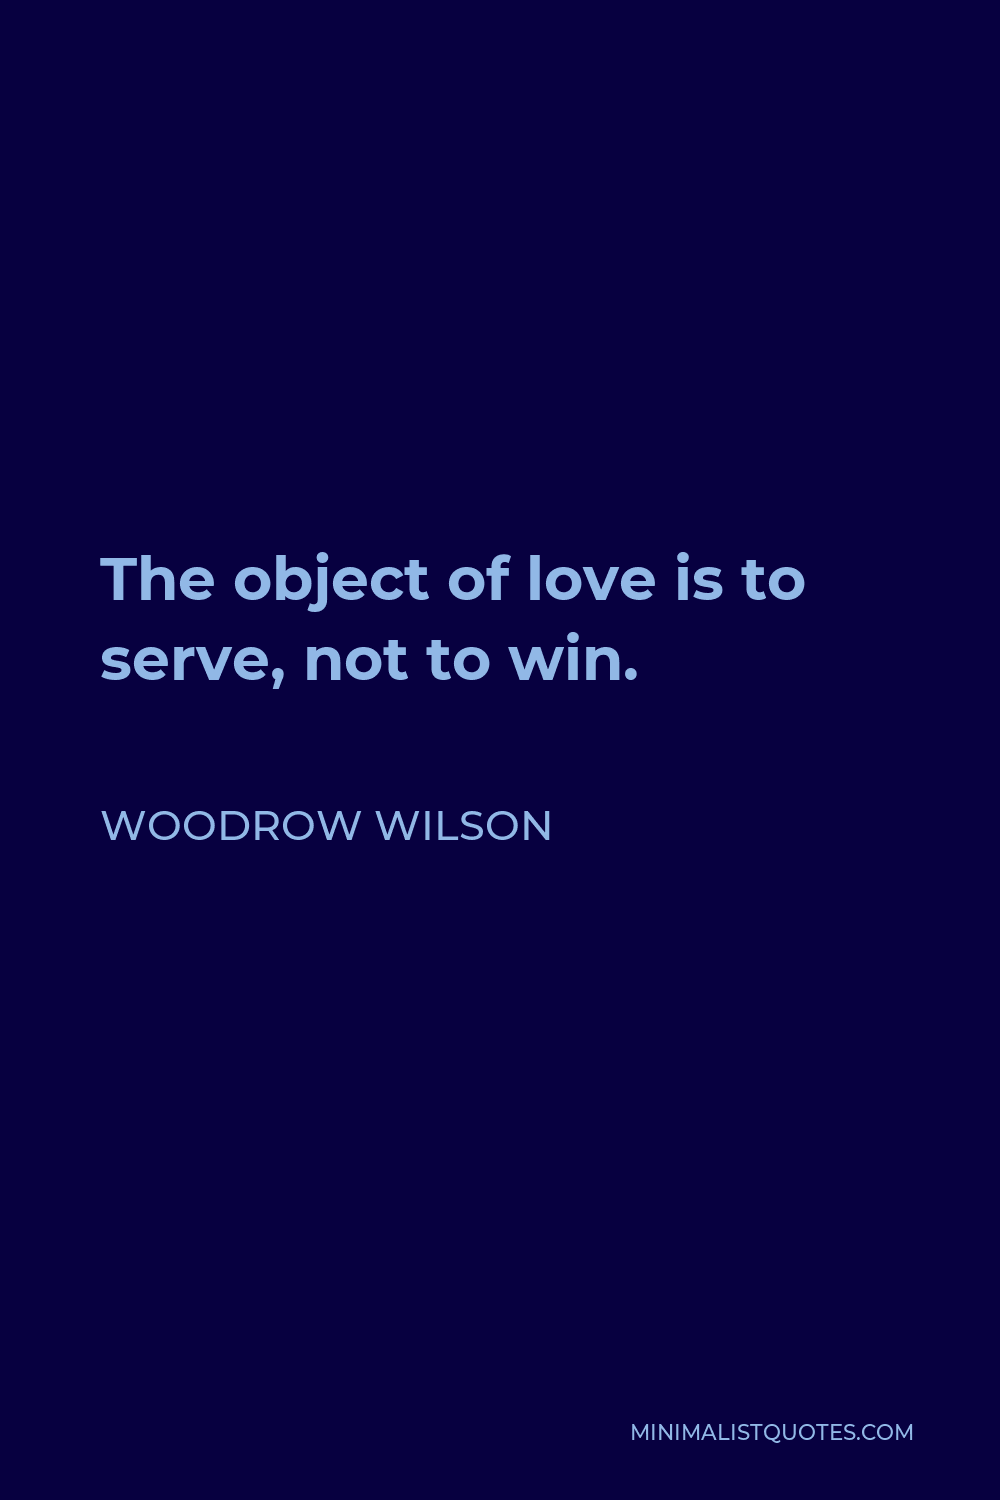 Woodrow Wilson Quote - The object of love is to serve, not to win.